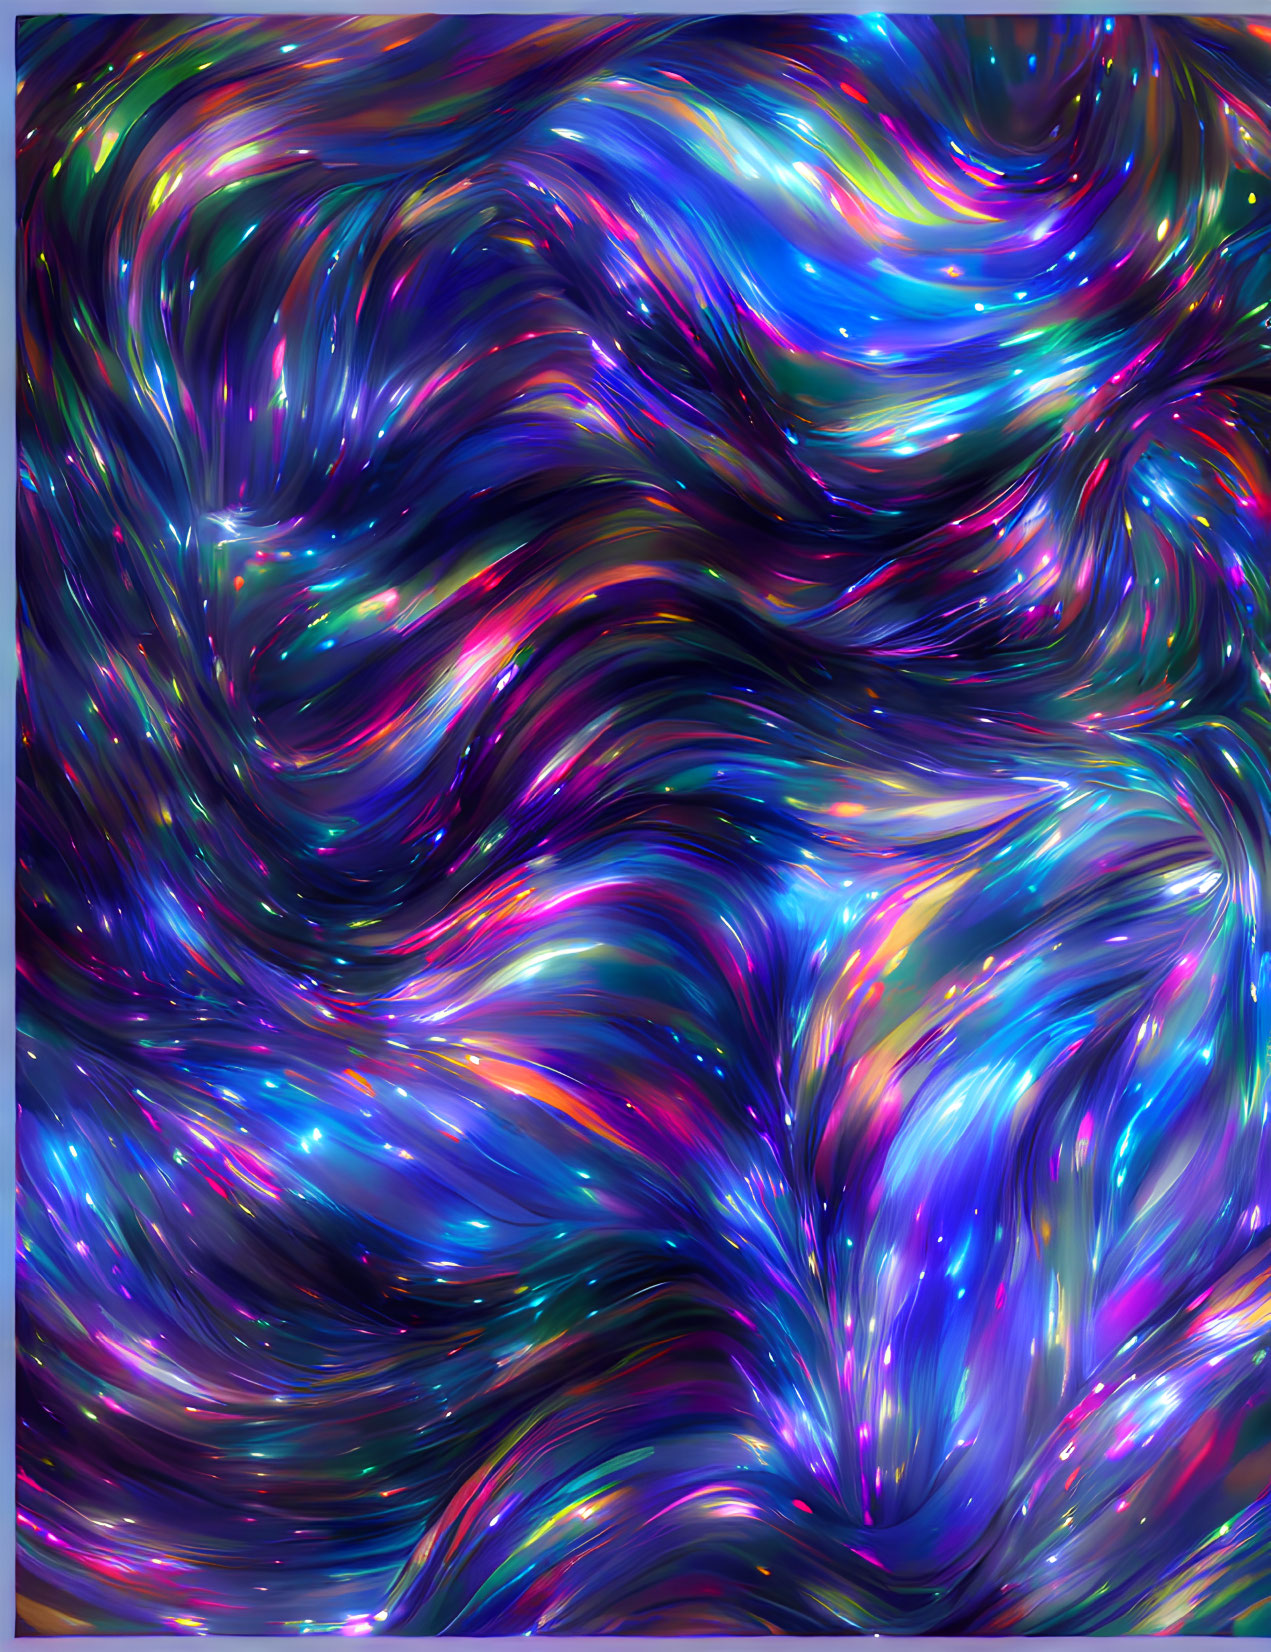 Colorful Abstract Swirling Patterns in Blue, Purple, Pink, and Teal